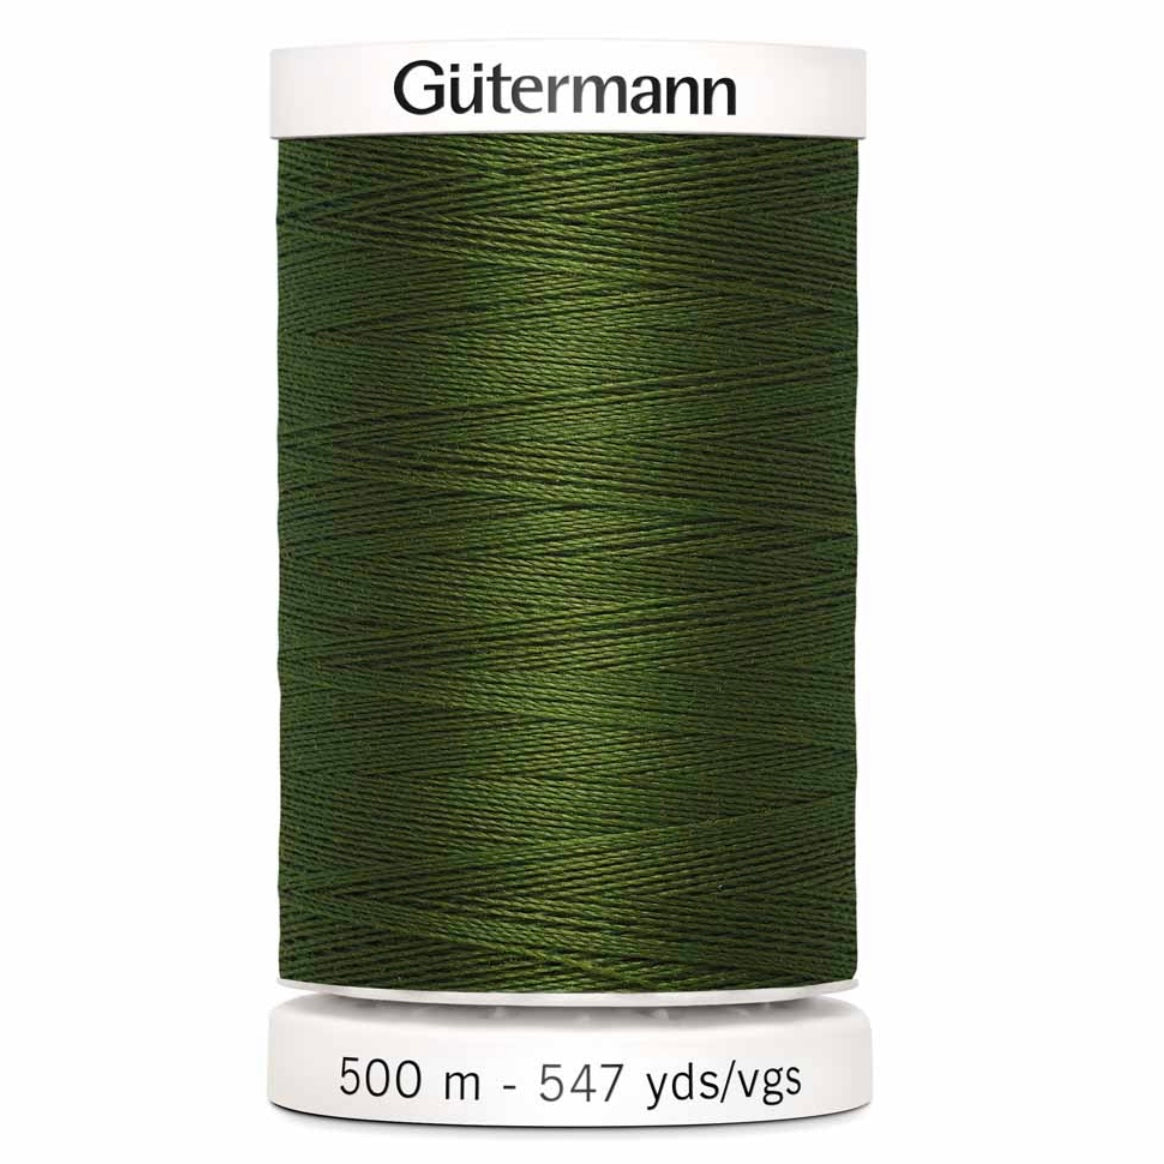 Sew-All Polyester Thread - Gütermann - Col. 780 / Olive